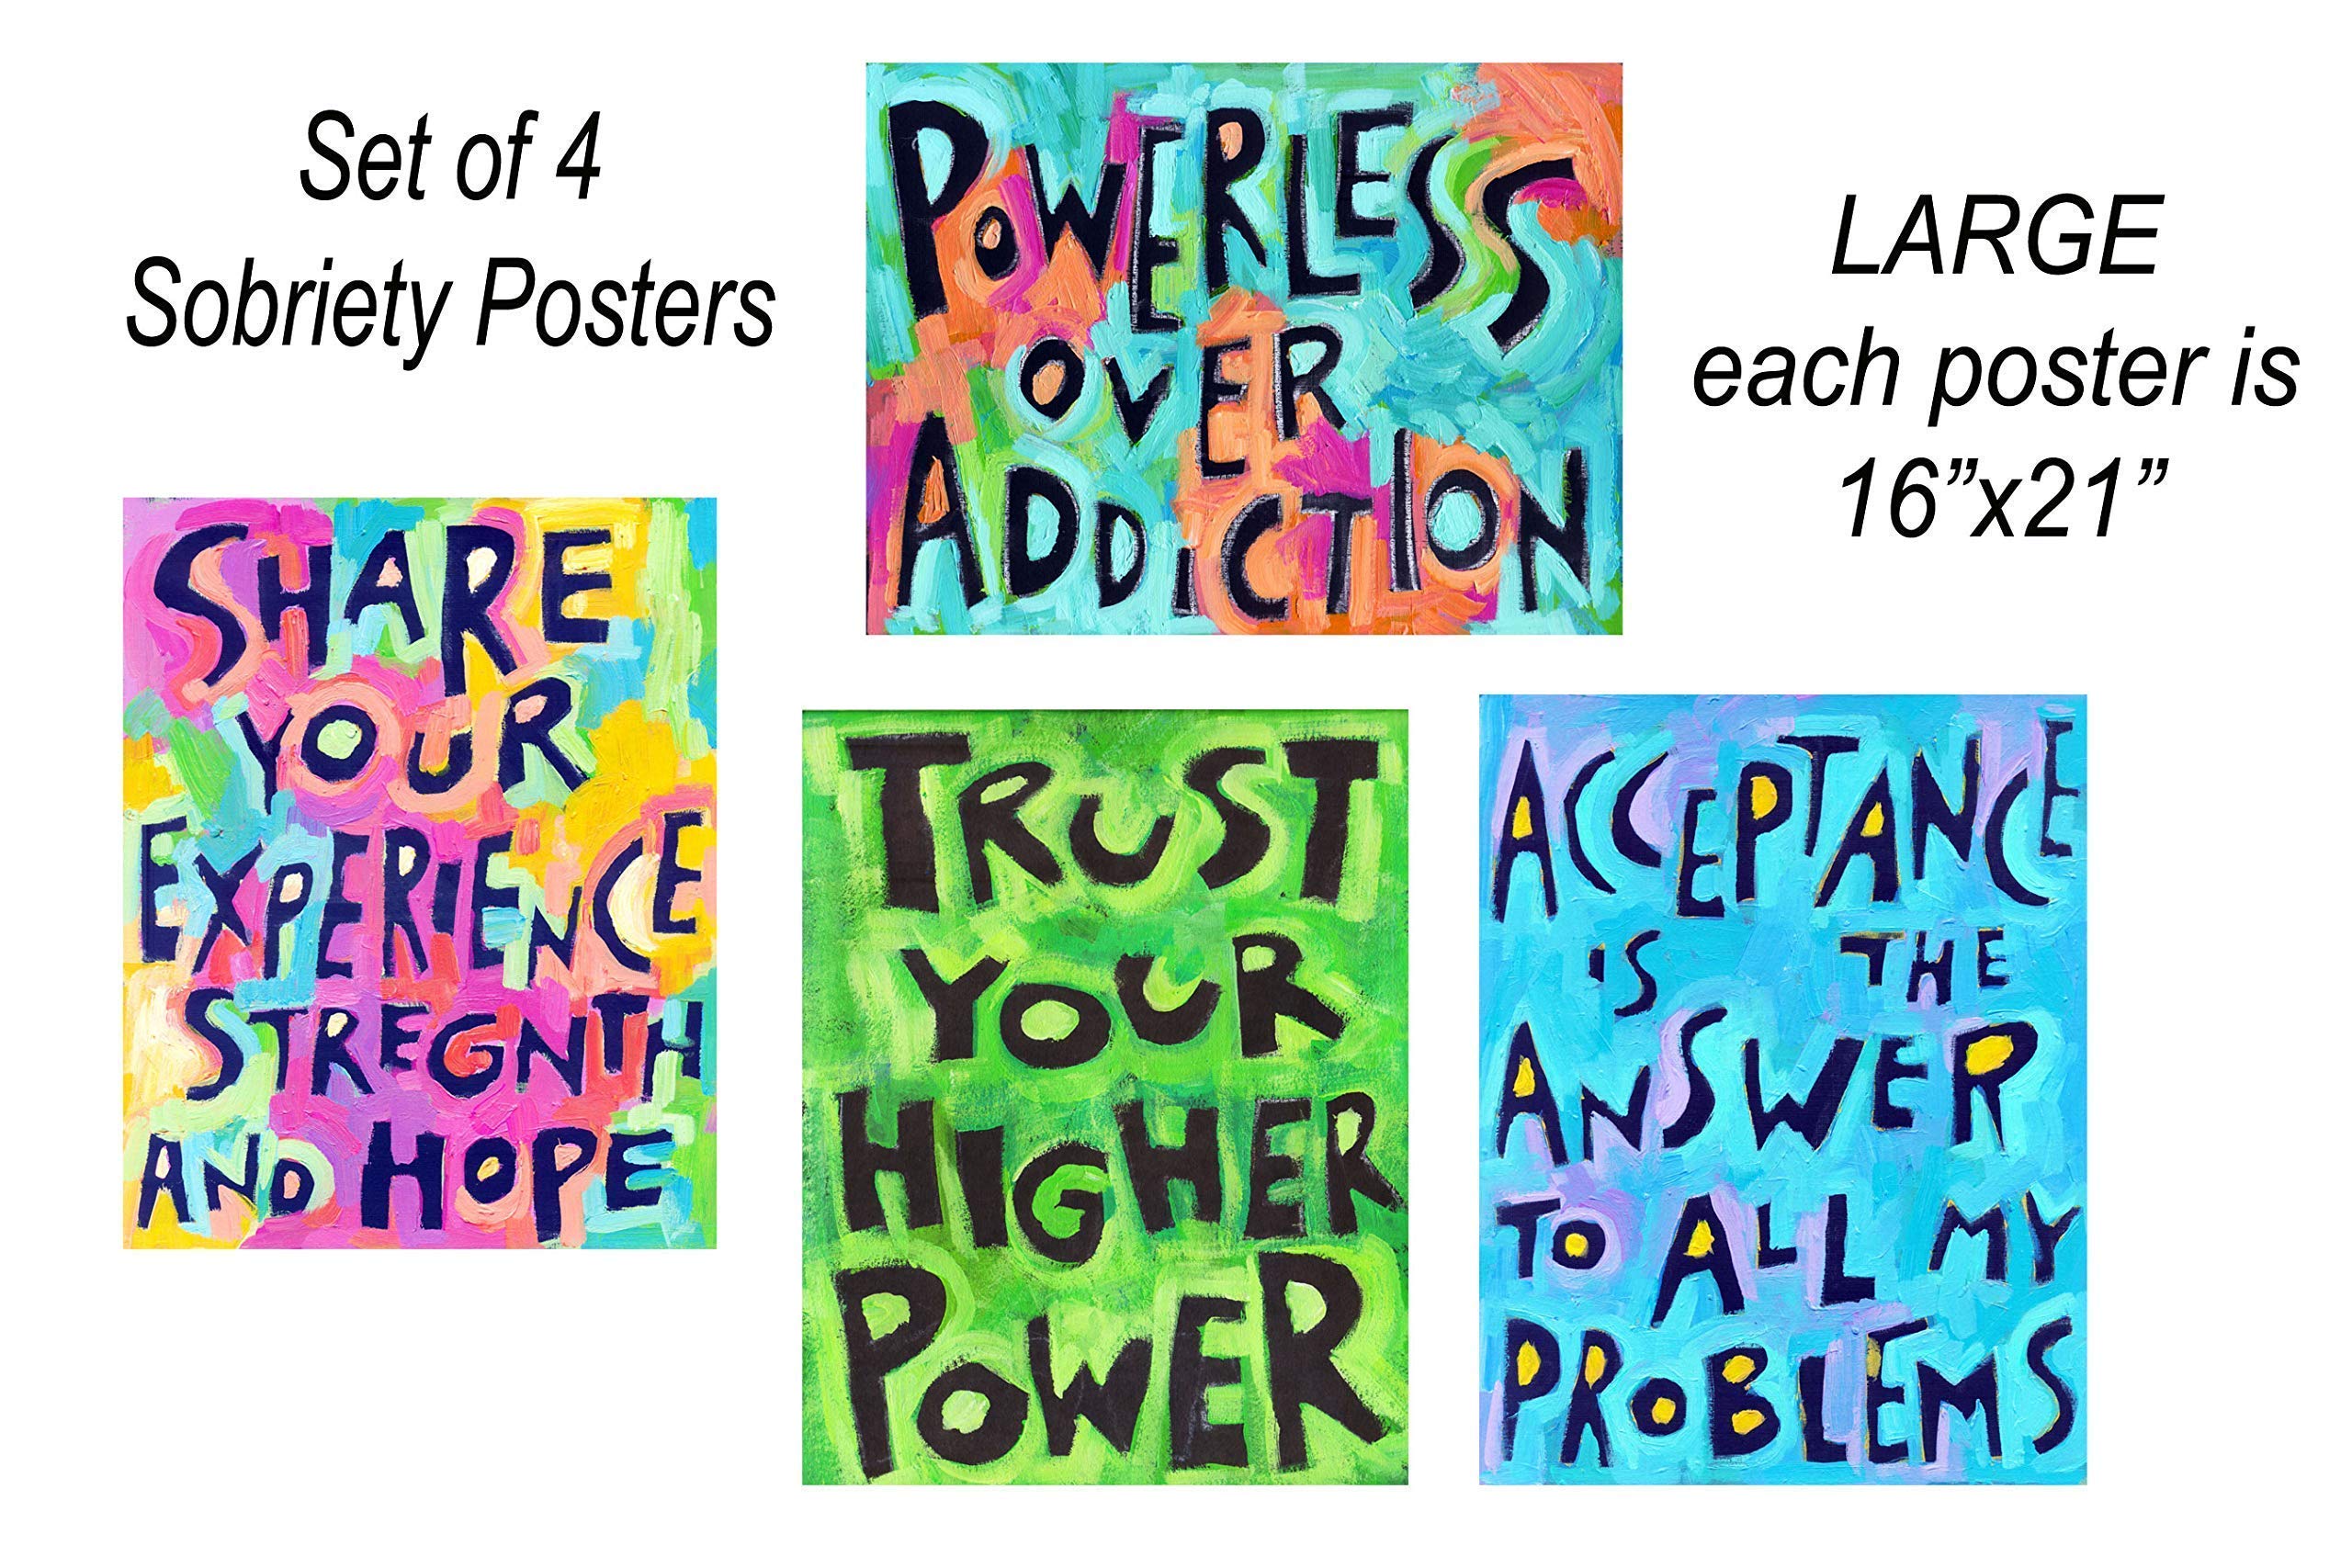 Wall Art For 12 Step Sober Posters Sobriety Addiction Recovery Set Of